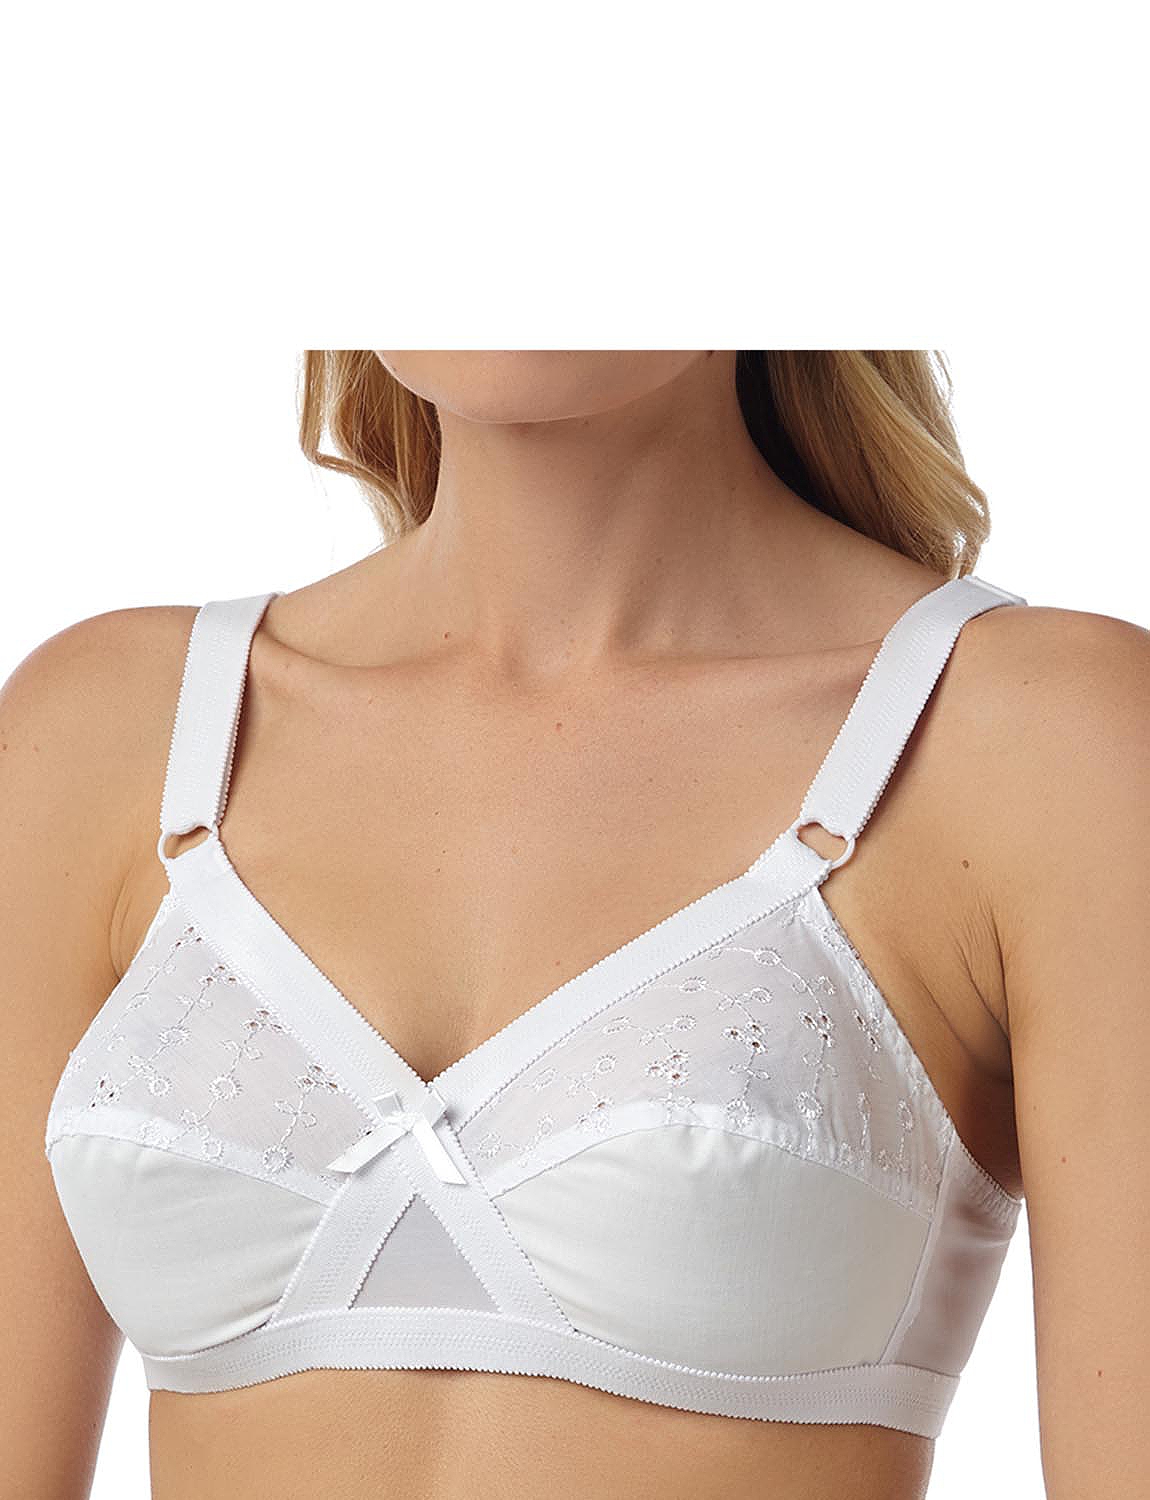 Fitness Game Front Fastening Bra 40 White Bra Clear Straps Sports